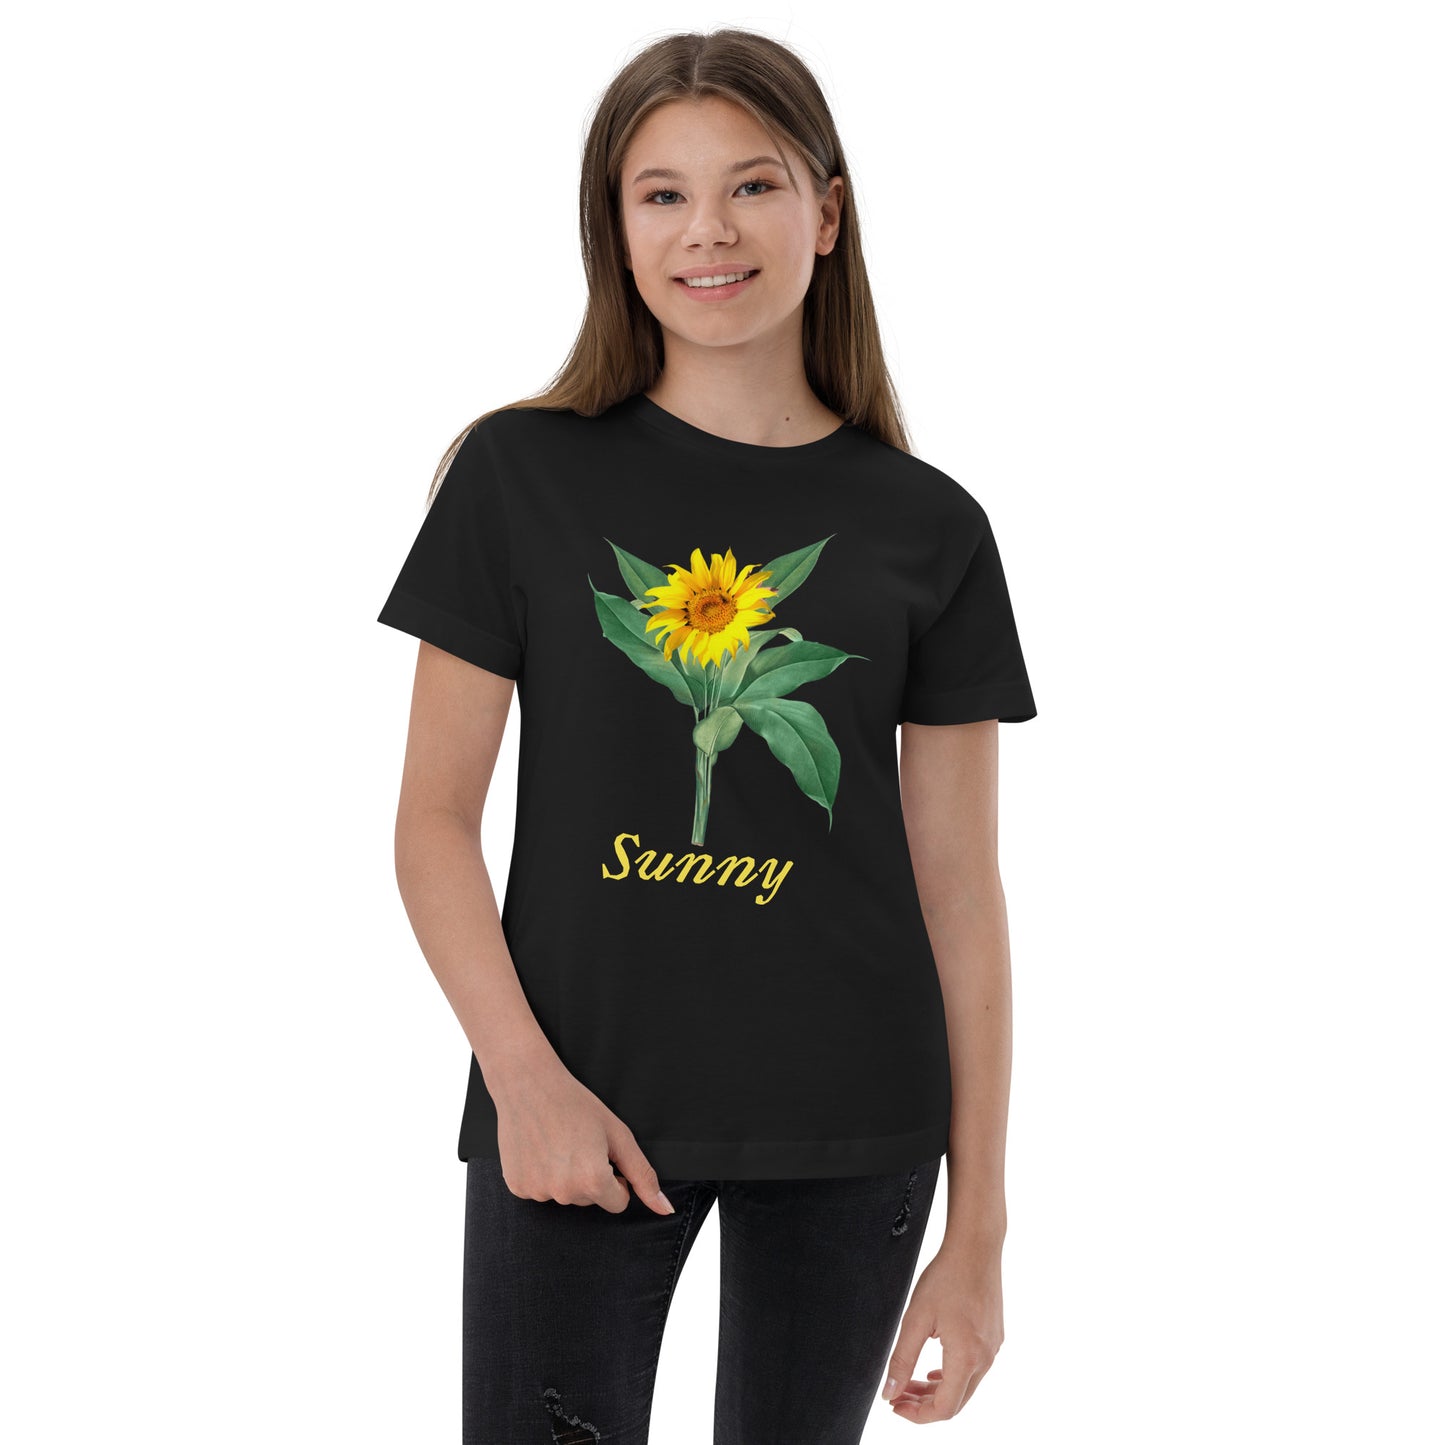 Youth jersey t-shirt-Sunny by Valerie